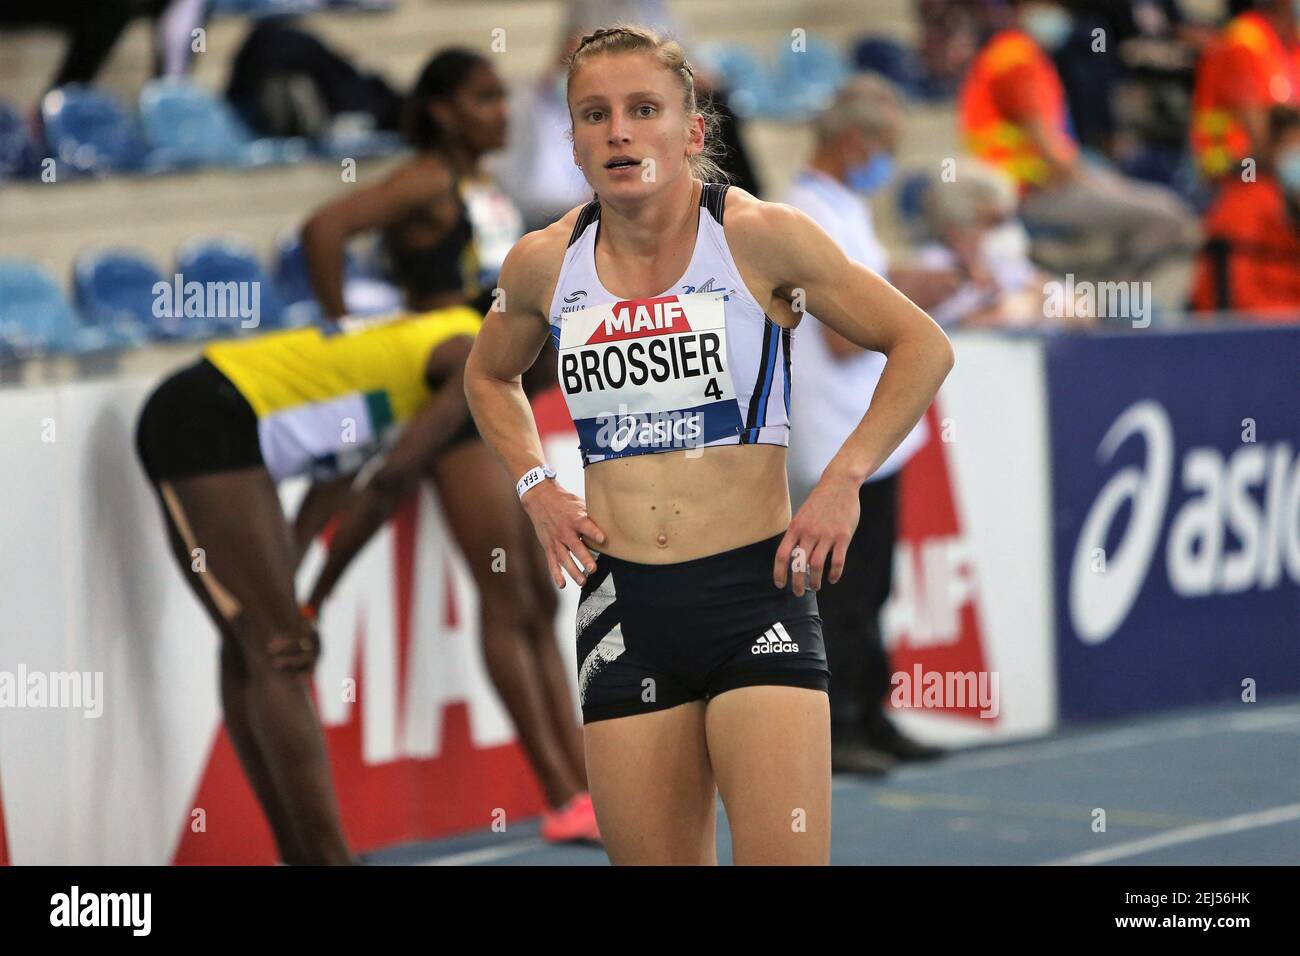 BROSSIER Amandine of Sco Angers Athle then Finale 400 m Women during the  French Indoor Athletics Championships 2021 on February 20, 2021 at Stadium  Miramas Metropole in Miramas, France - Photo Laurent